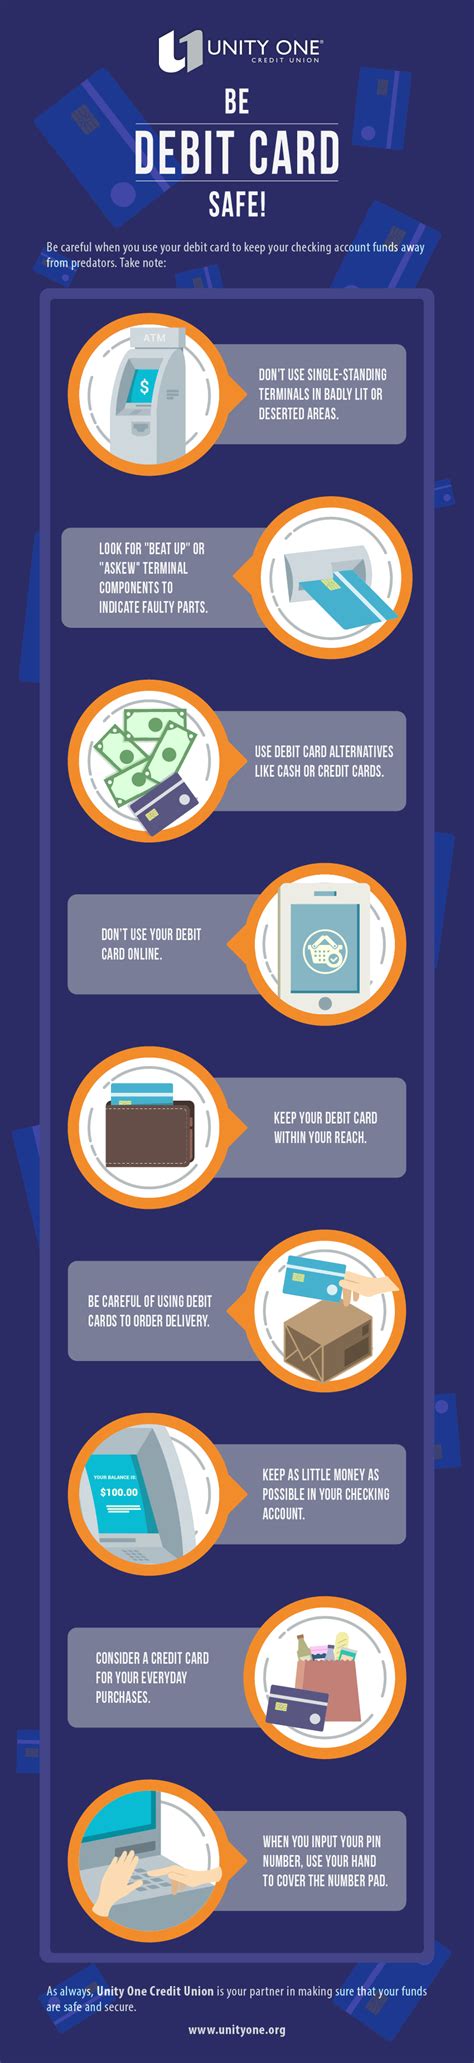 How To Be Debit Card Safe Infographic Visualistan